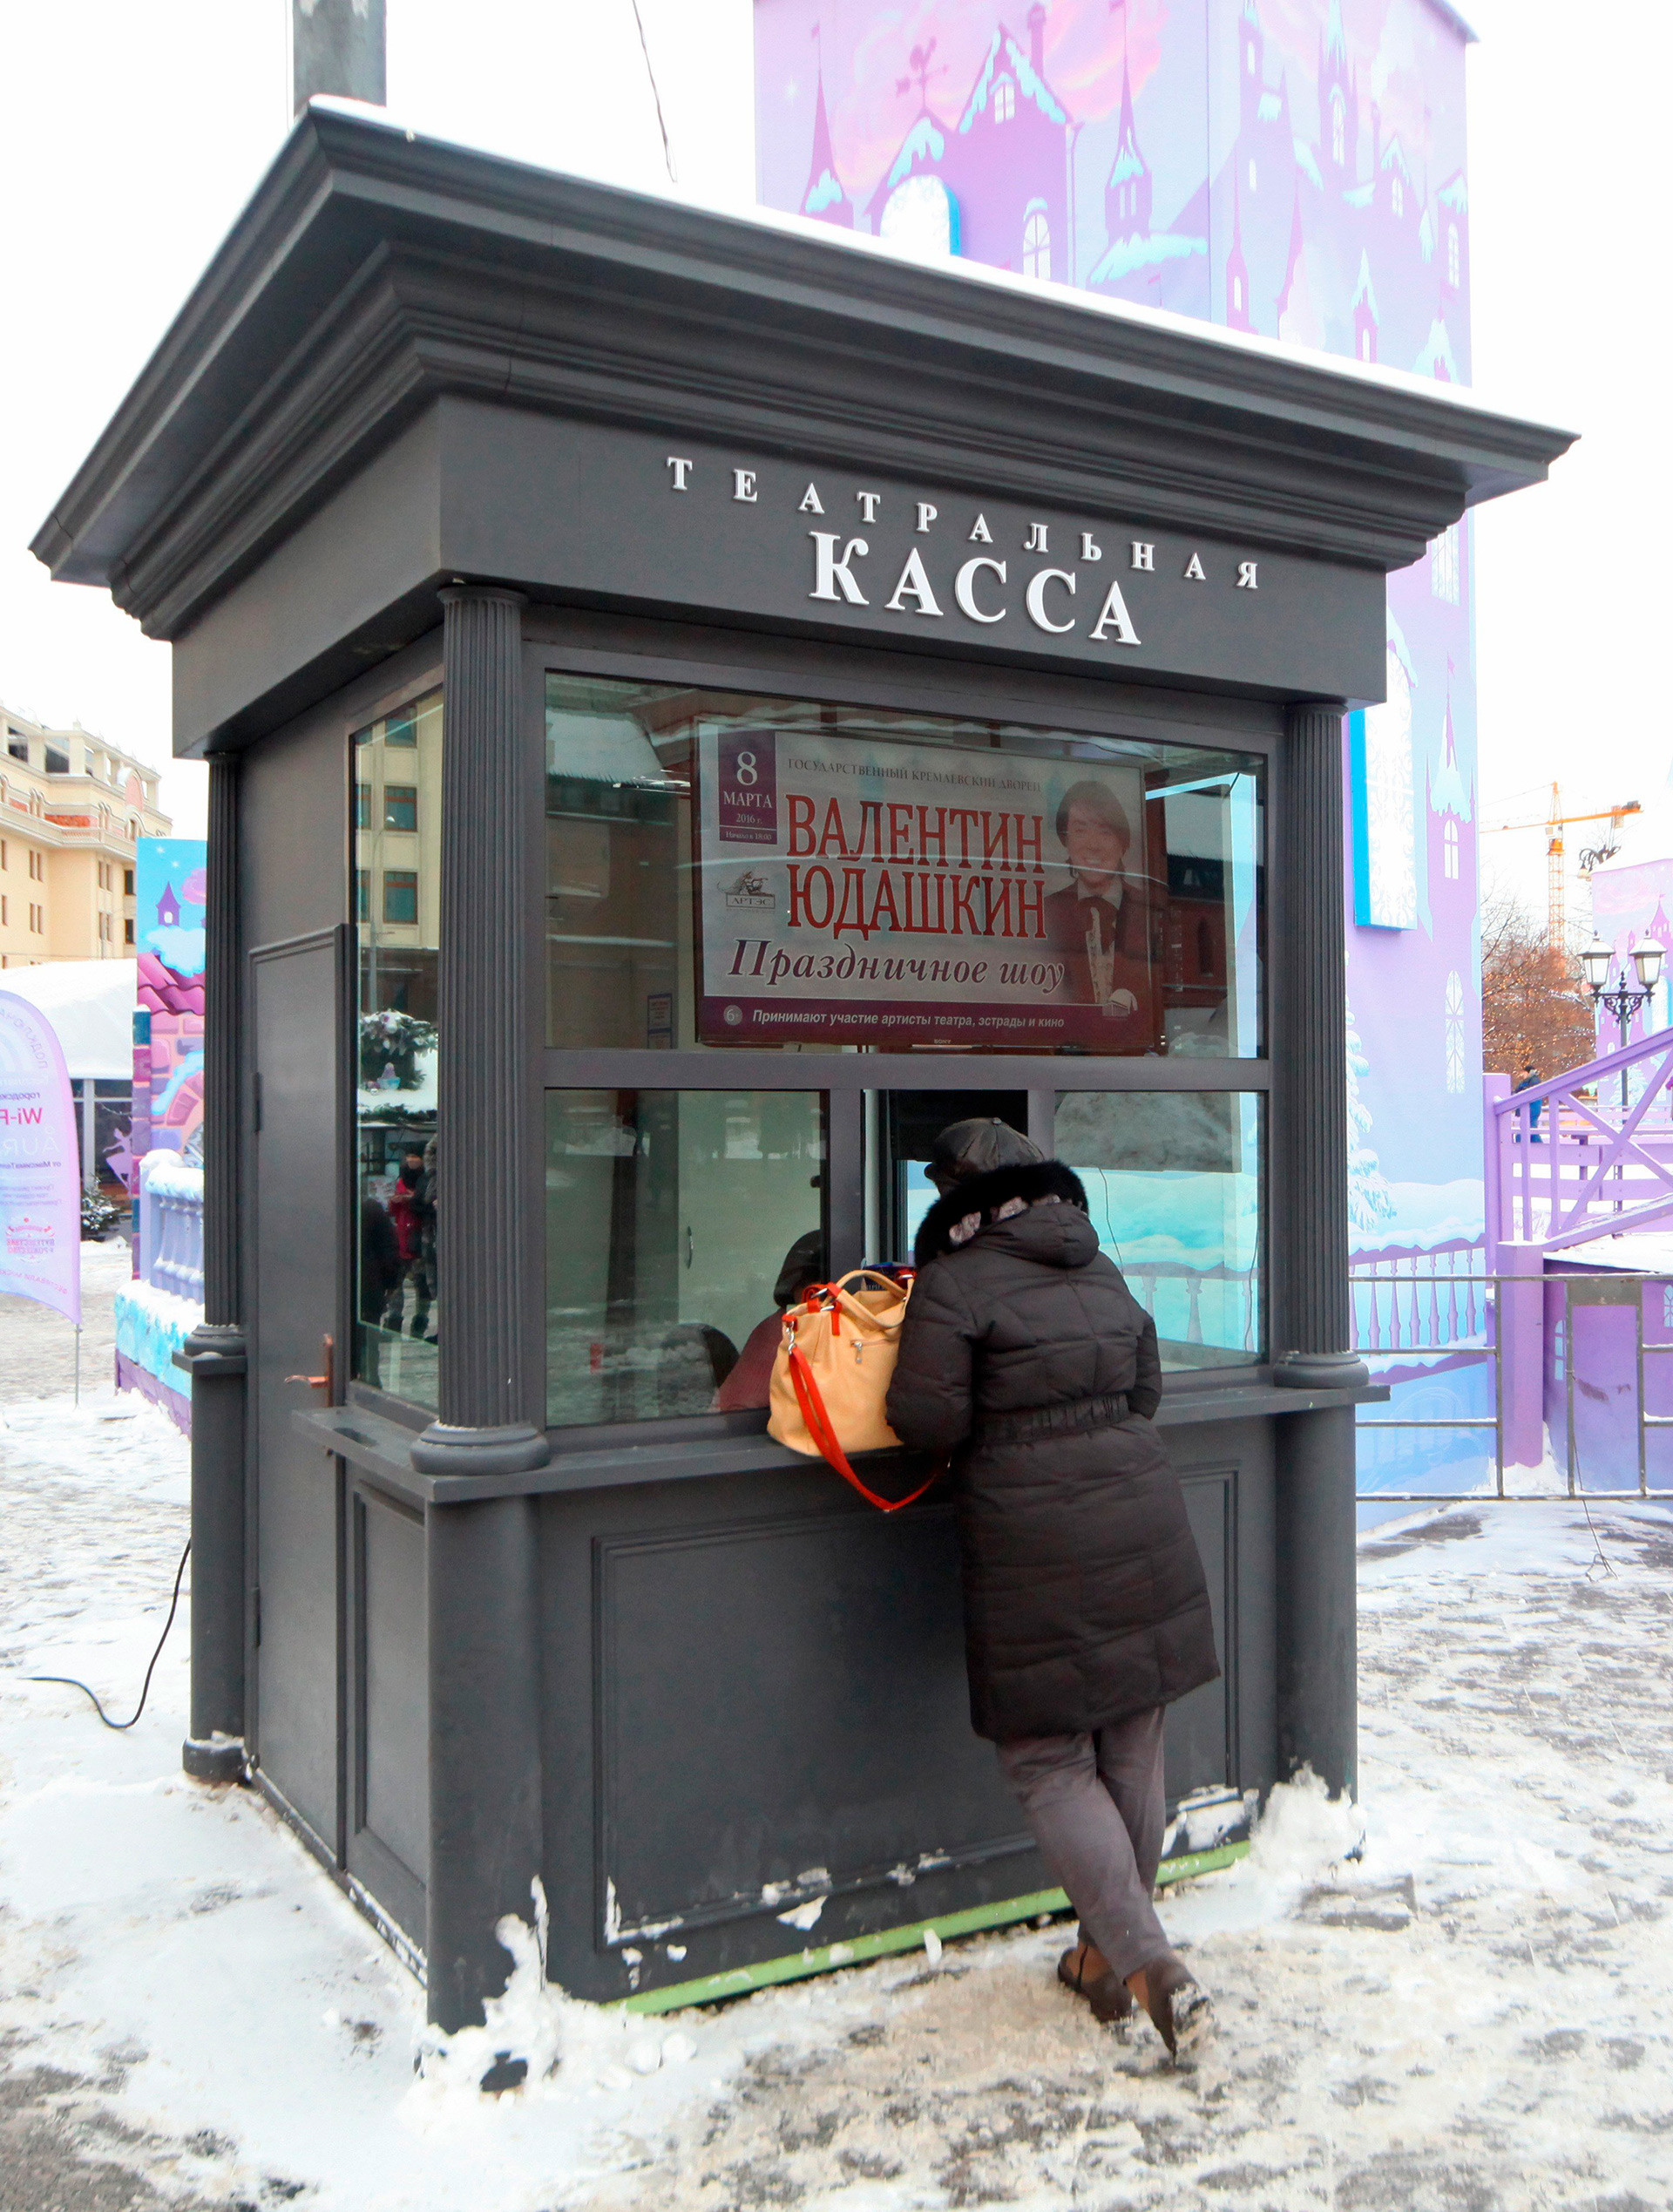 You can find the theatrical kiosk everywhere in Moscow.